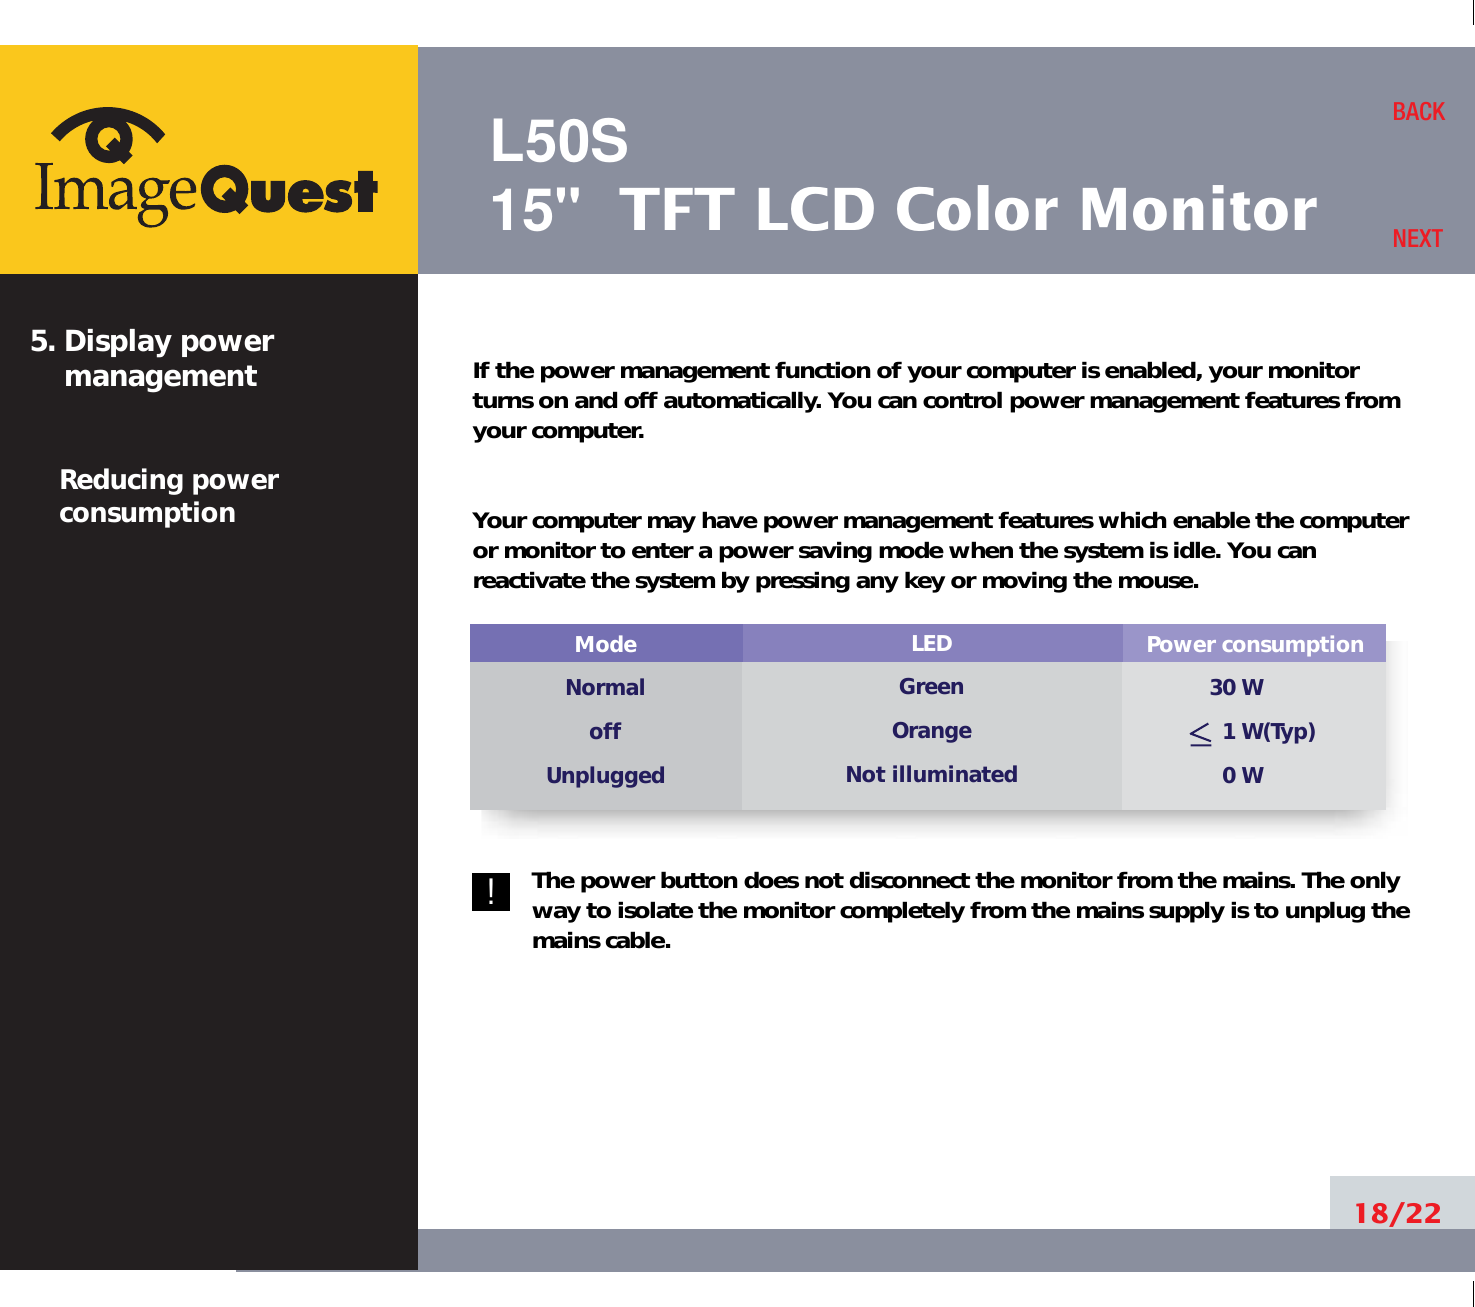 L50S15&quot; TFT LCD Color MonitorIf the power management function of your computer is enabled, your monitorturns on and off automatically. You can control power management features fromyour computer.Your computer may have power management features which enable the computeror monitor to enter a power saving mode when the system is idle. You canreactivate the system by pressing any key or moving the mouse.The power button does not disconnect the monitor from the mains. The onlyway to isolate the monitor completely from the mains supply is to unplug themains cable.18/22BACKNEXT5. Display power managementReducing powerconsumptionPower consumption30 W 1 W(Typ)0 WModeNormaloffUnpluggedLEDGreenOrangeNot illuminated!